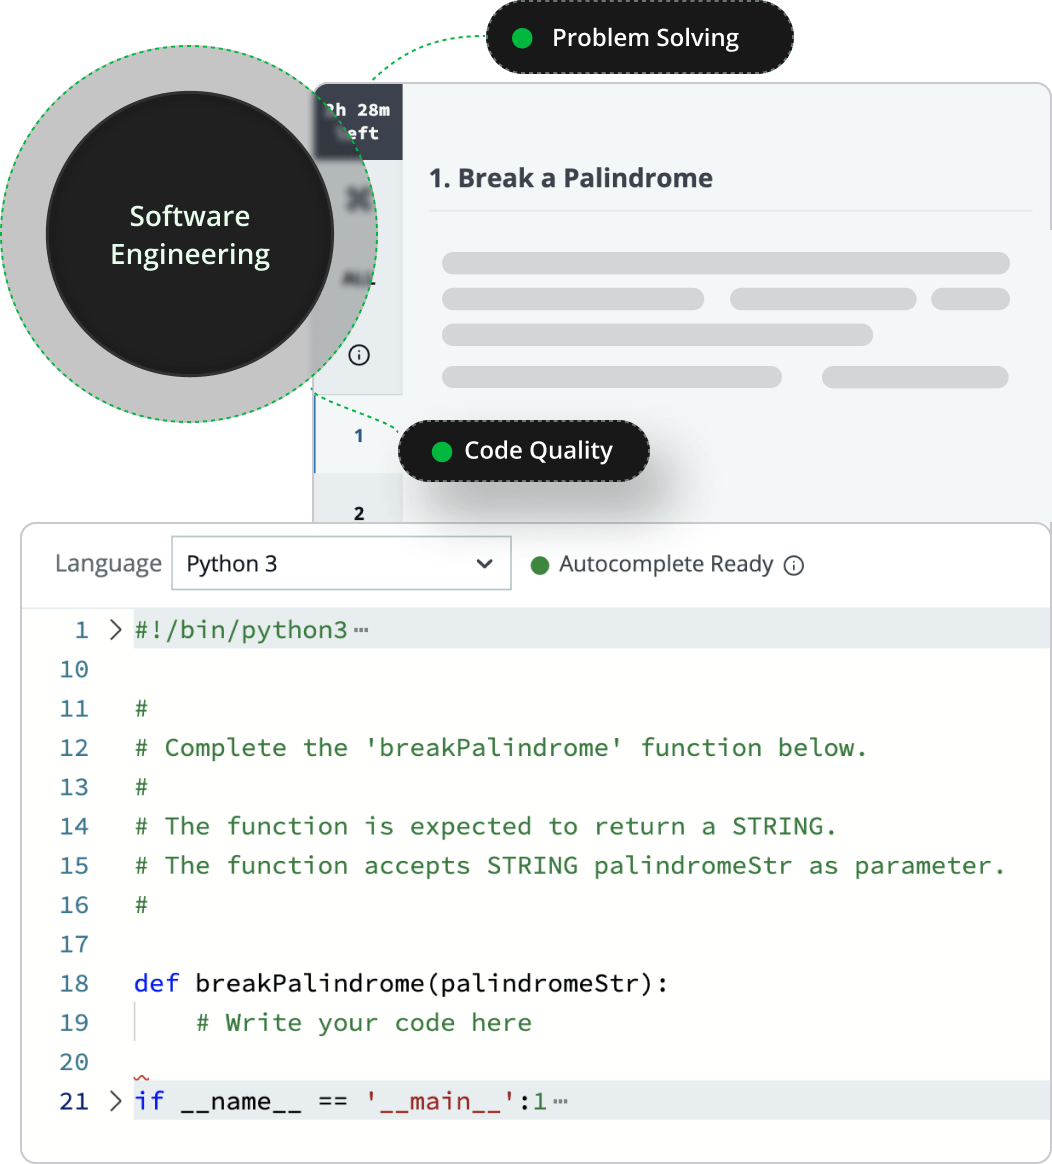 Screenshot of a HackerRank software engineering coding test. Also includes illustration of skills related to software engineering.